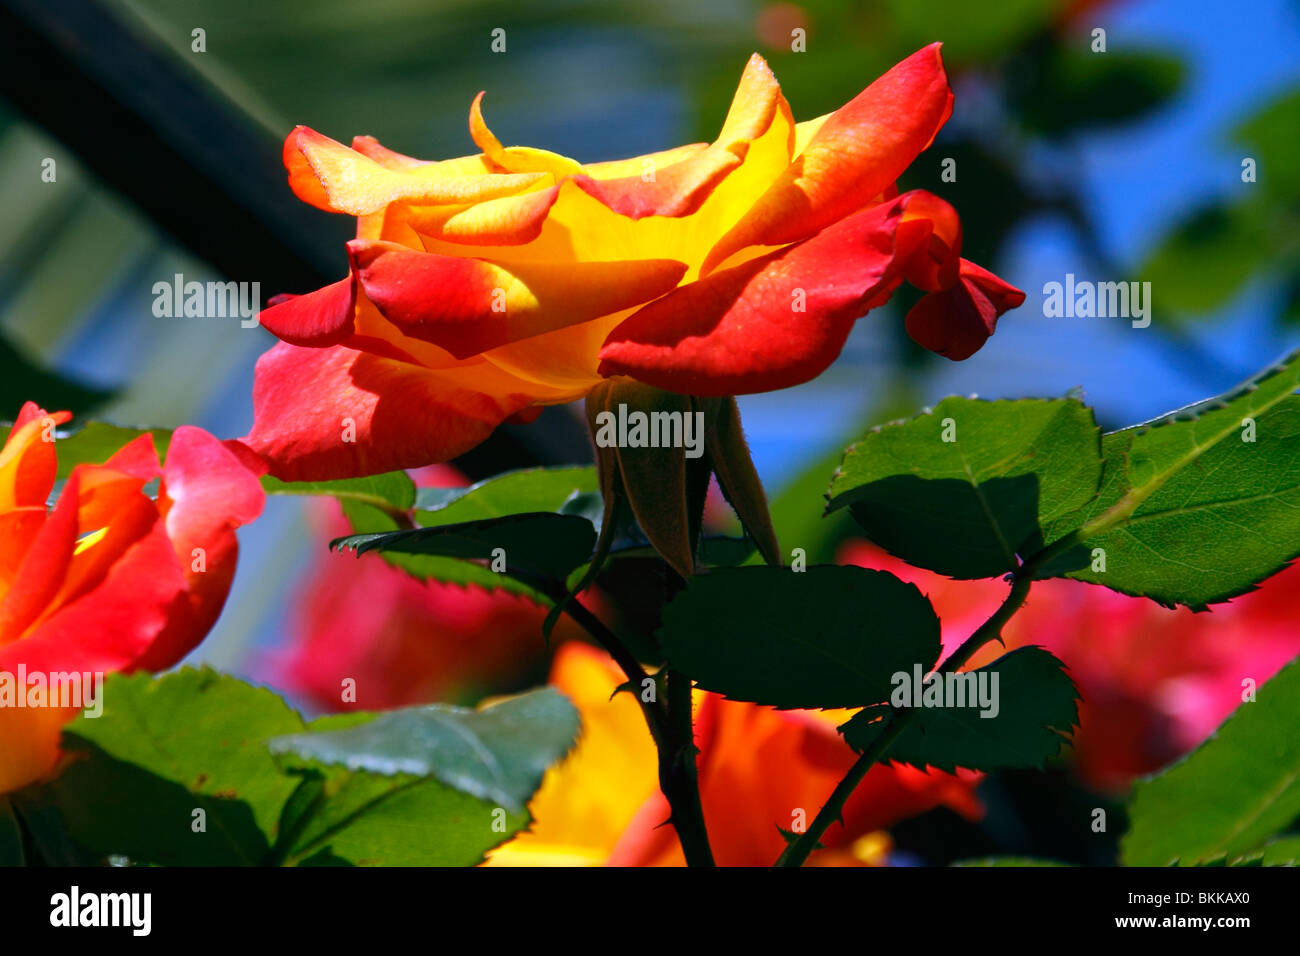 A red and Yellow Rose Stock Photo